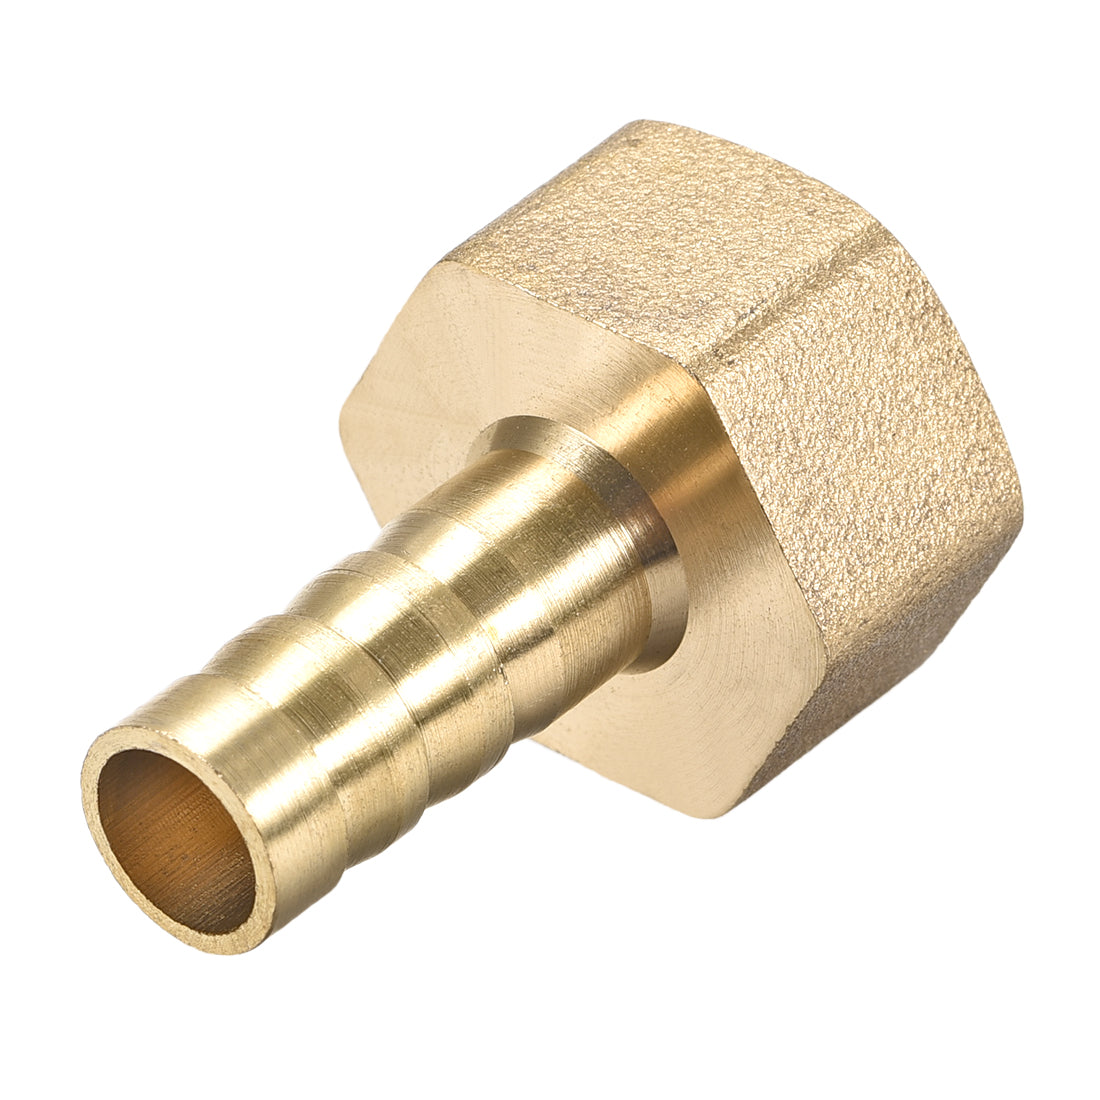 uxcell Uxcell Brass Barb Hose Fitting Connector Adapter 10mmx36mm Barbed x G1/2 Female Pipe 3pcs